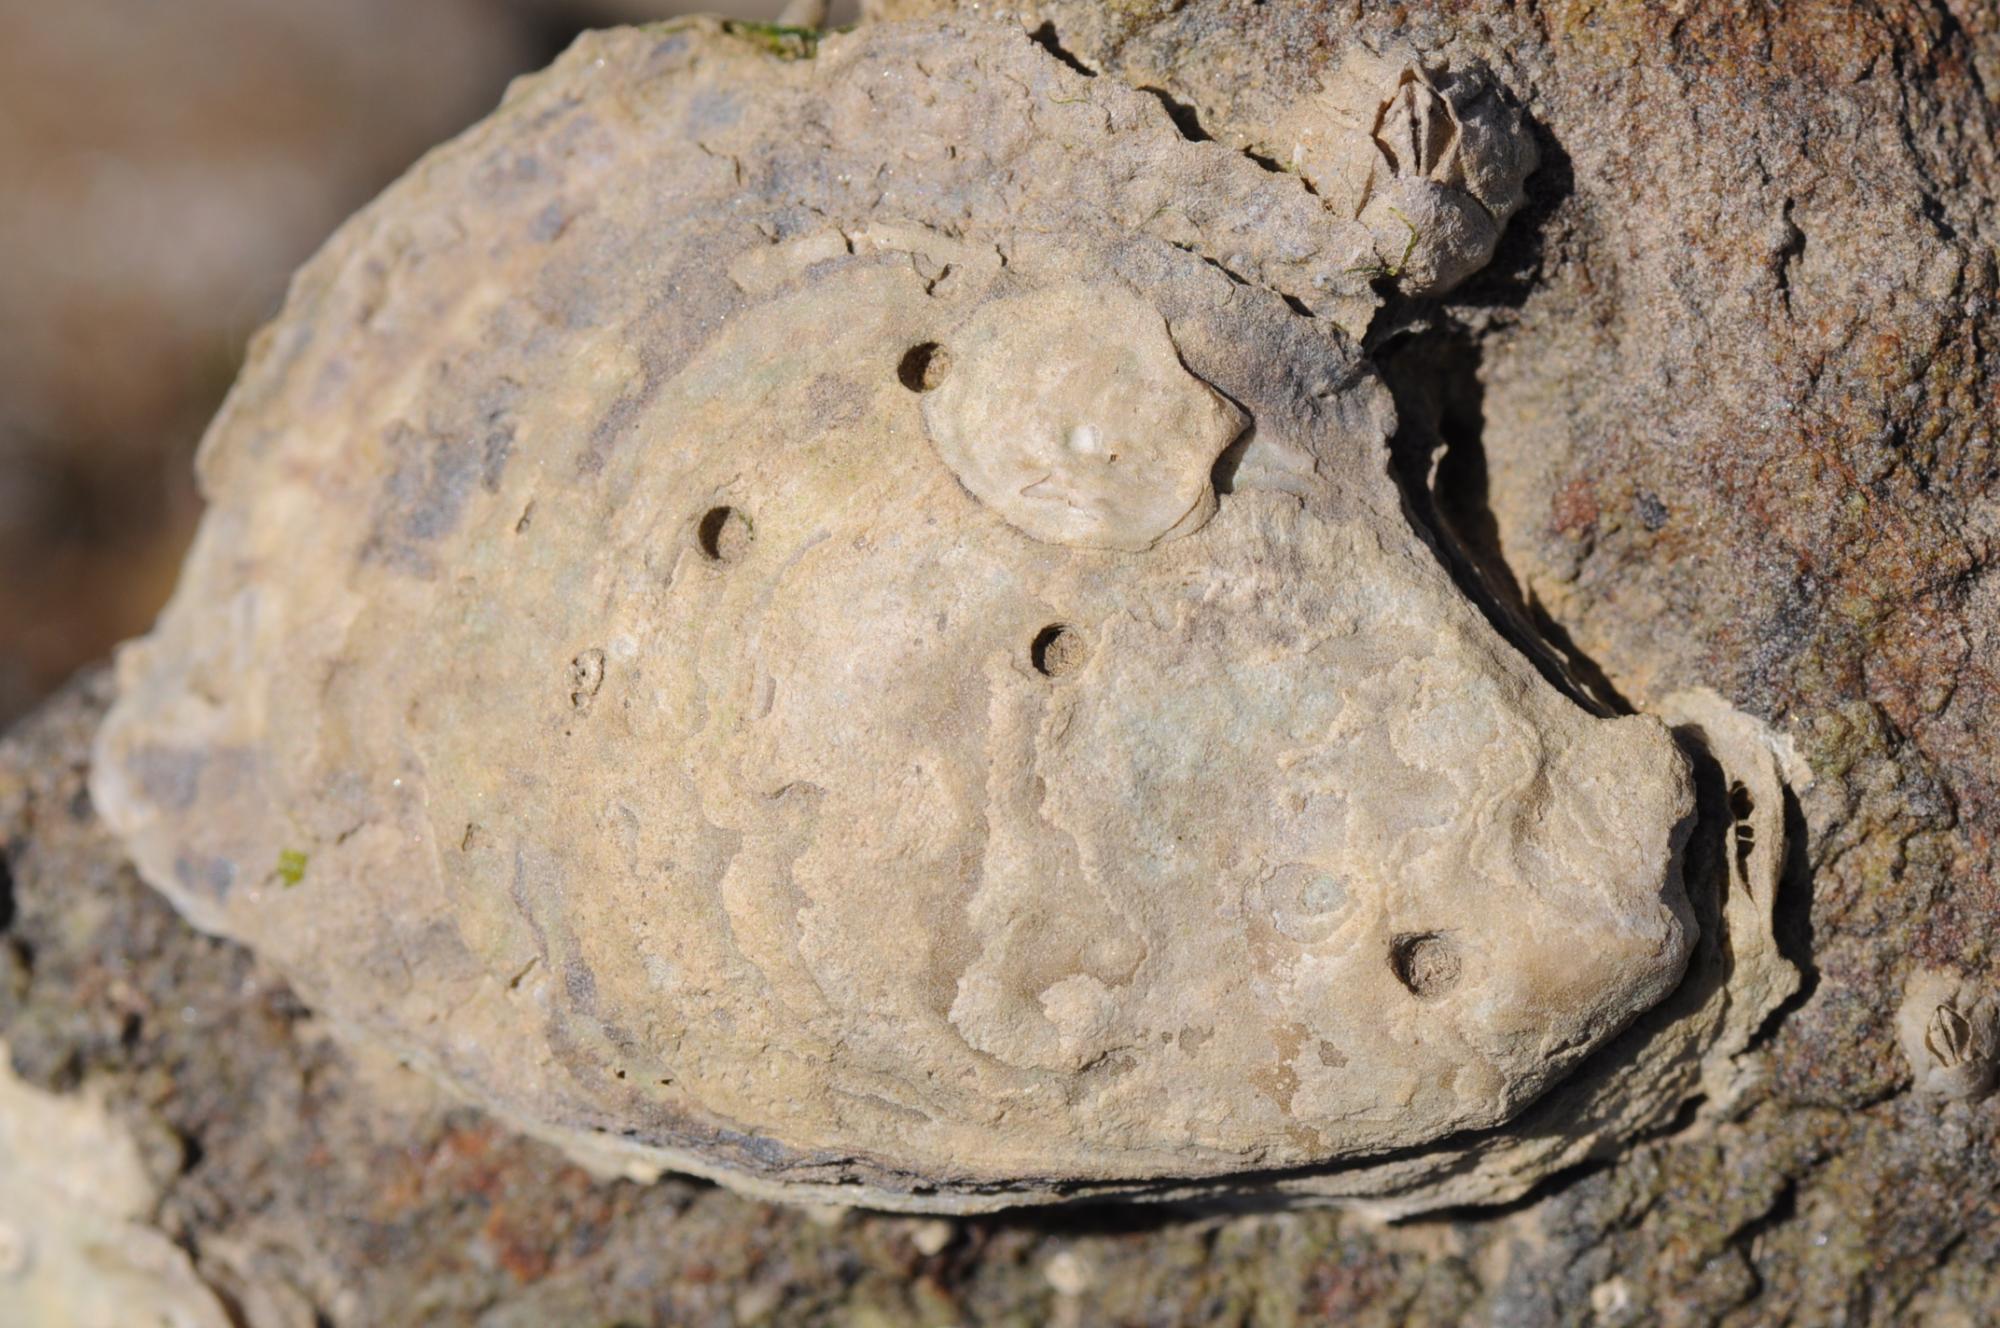 Oyster with hole marks from oyster drill